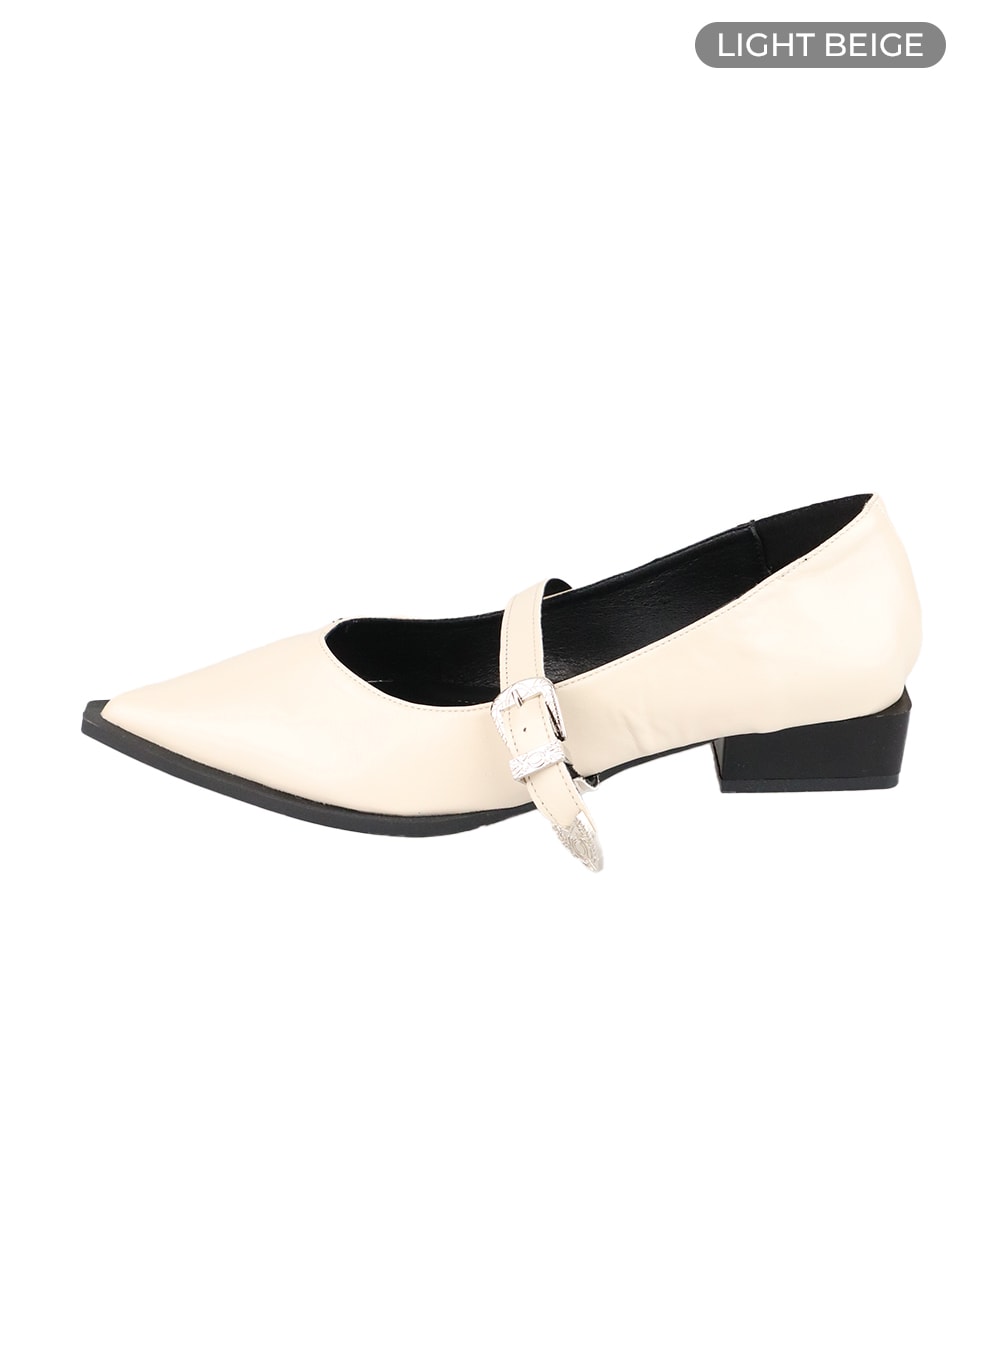 buckle-pointed-toe-flats-with-low-heels-ca412